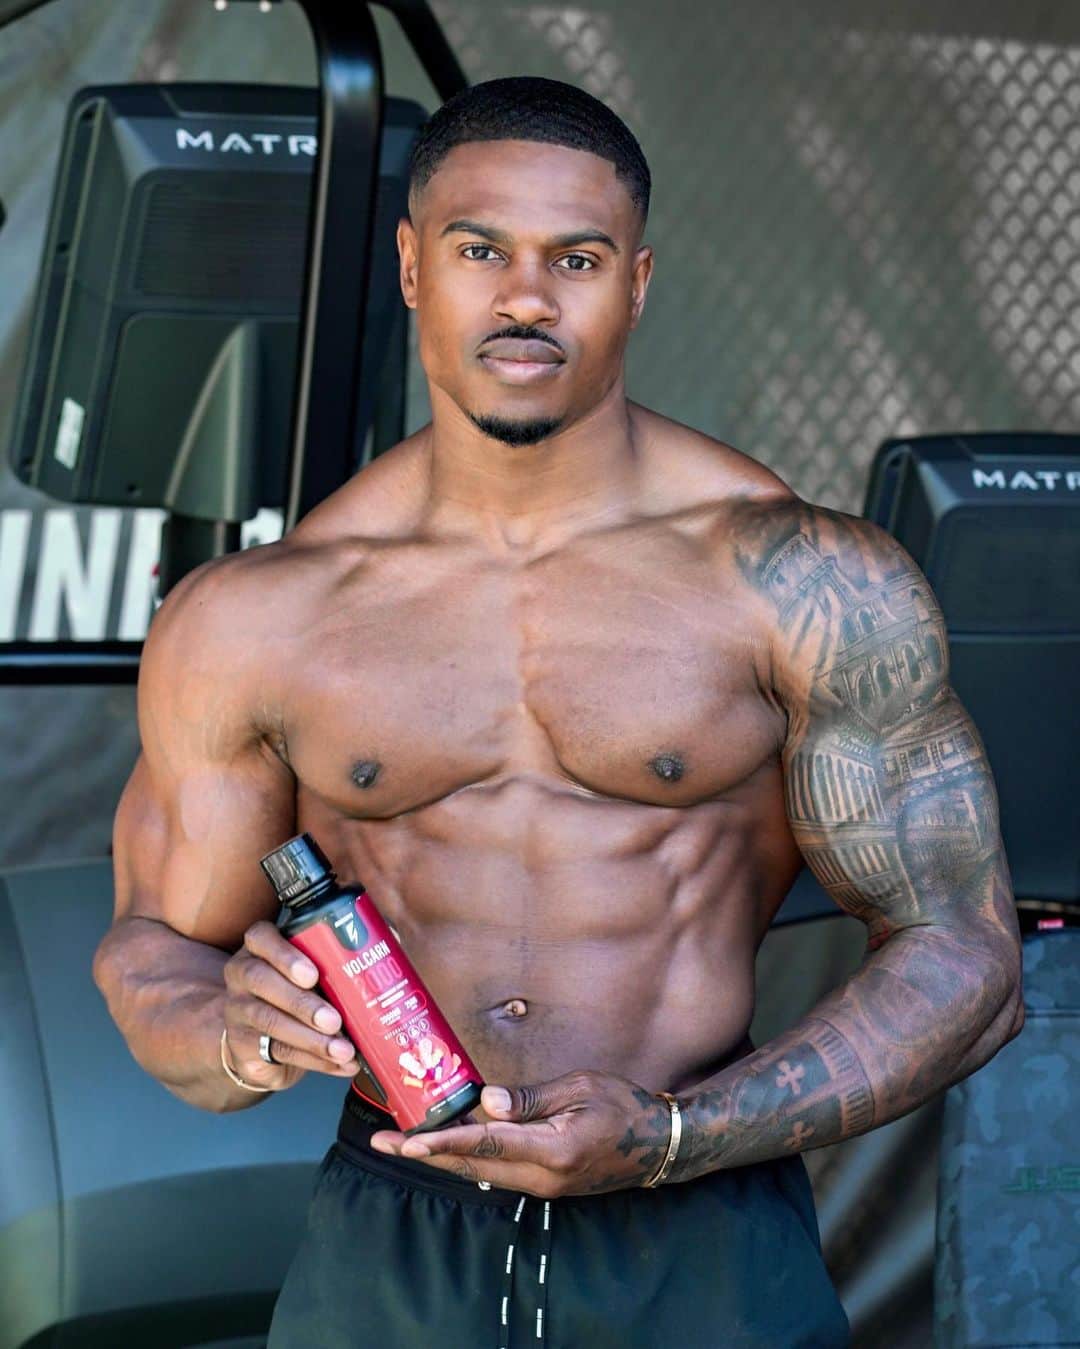 Simeon Pandaのインスタグラム：「Cardio with @innosupps Volcarn equals SWEAT x 💯 💦😅 Let’s go!   🤔 What’s in Volcarn 2000?⁣⁣ ⁣⁣ 👉🏾 Each serving of Volcarn™ 2000 contains 2000mg of liquid Carnitine and 25mg of GBEEC (“Super Carnitine” 🦸‍♂️) Both ingredients work together to boost your ATP stores (your fuel ⛽️), speed up your metabolism, give you more endurance and the GBEEC is a potent thermogenic they will make you SWEAT 💦 😅⁣⁣⁣⁣⁣ ⁣⁣⁣⁣⁣ 🌱 Volcarn 2000 contains ZERO artificial sweeteners, fillers, and harmful additives. ⁣⁣⁣⁣⁣ ⁣⁣ 👉🏾 Link in @innosupps bio or shop at: INNOSUPPS.COM⁣⁣  #innosupps #volcarn」